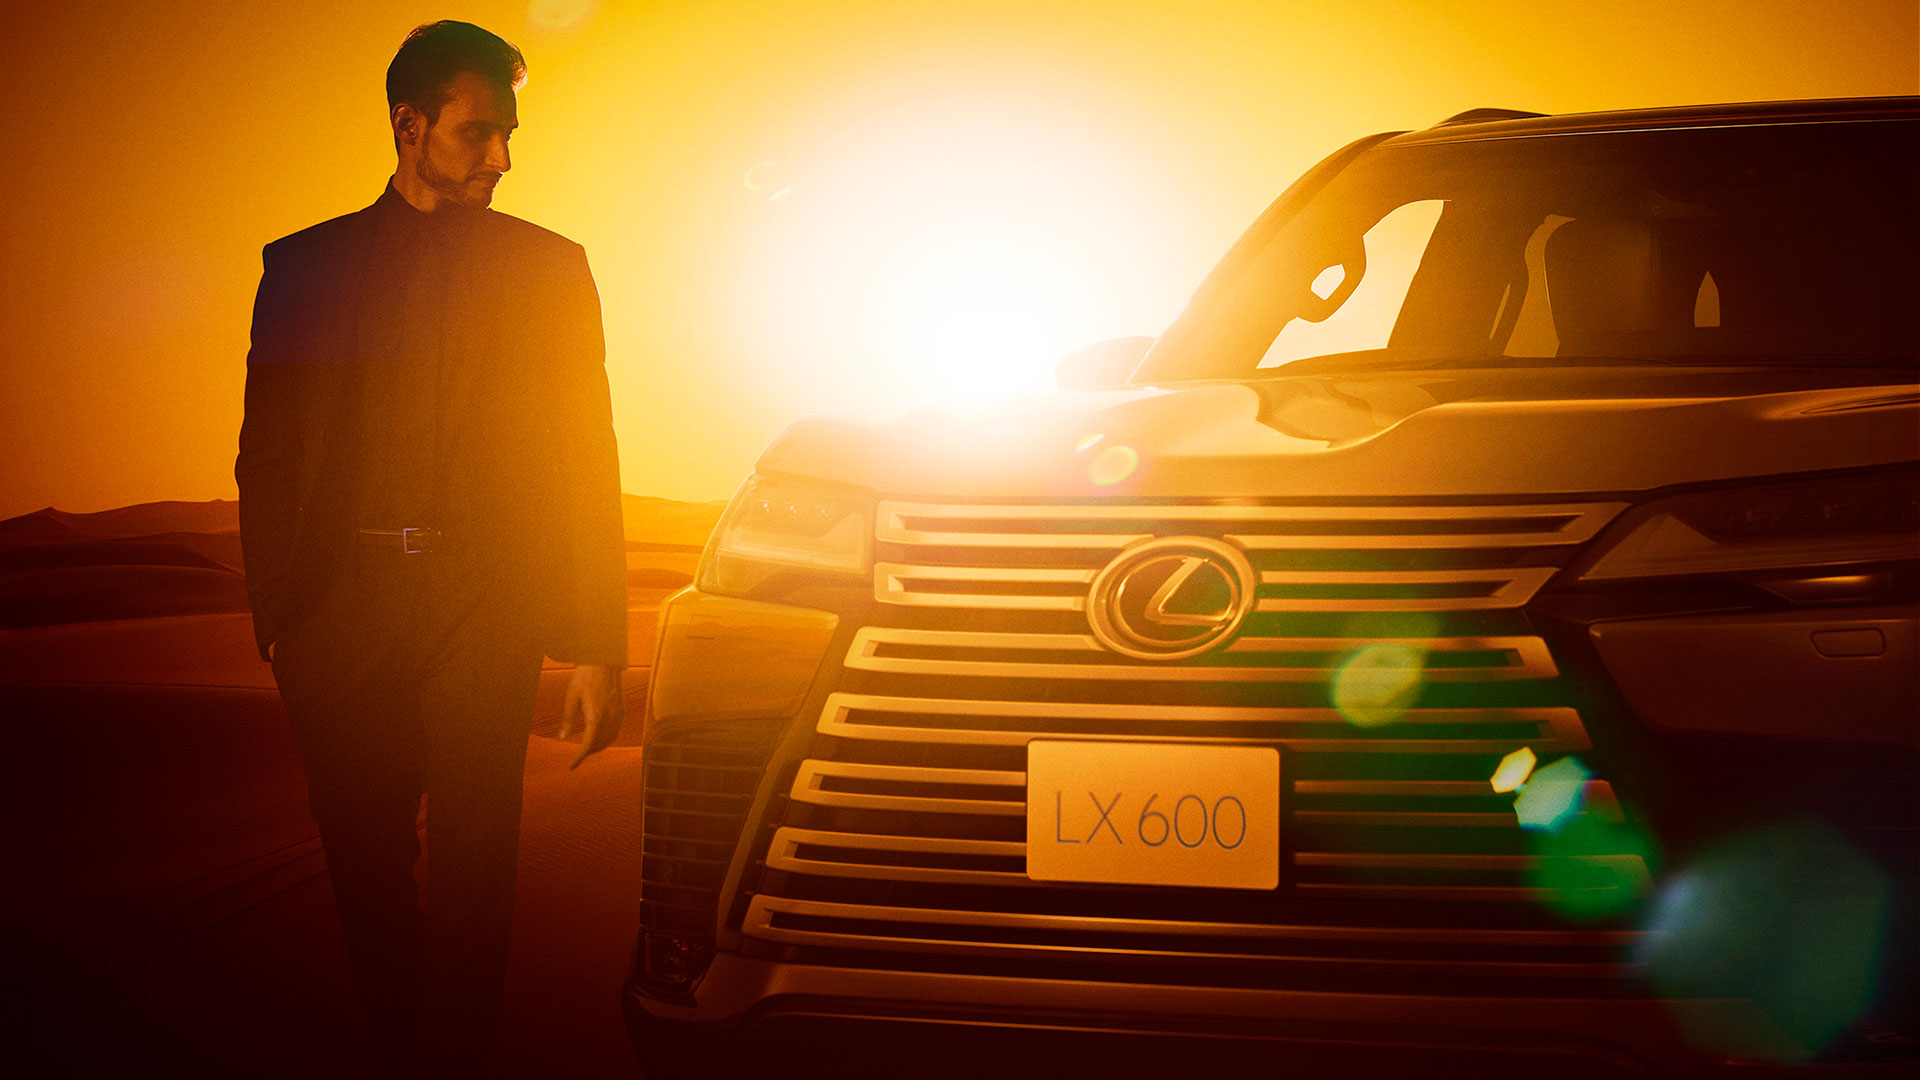 Lexus LX 600 with the sun setting behind